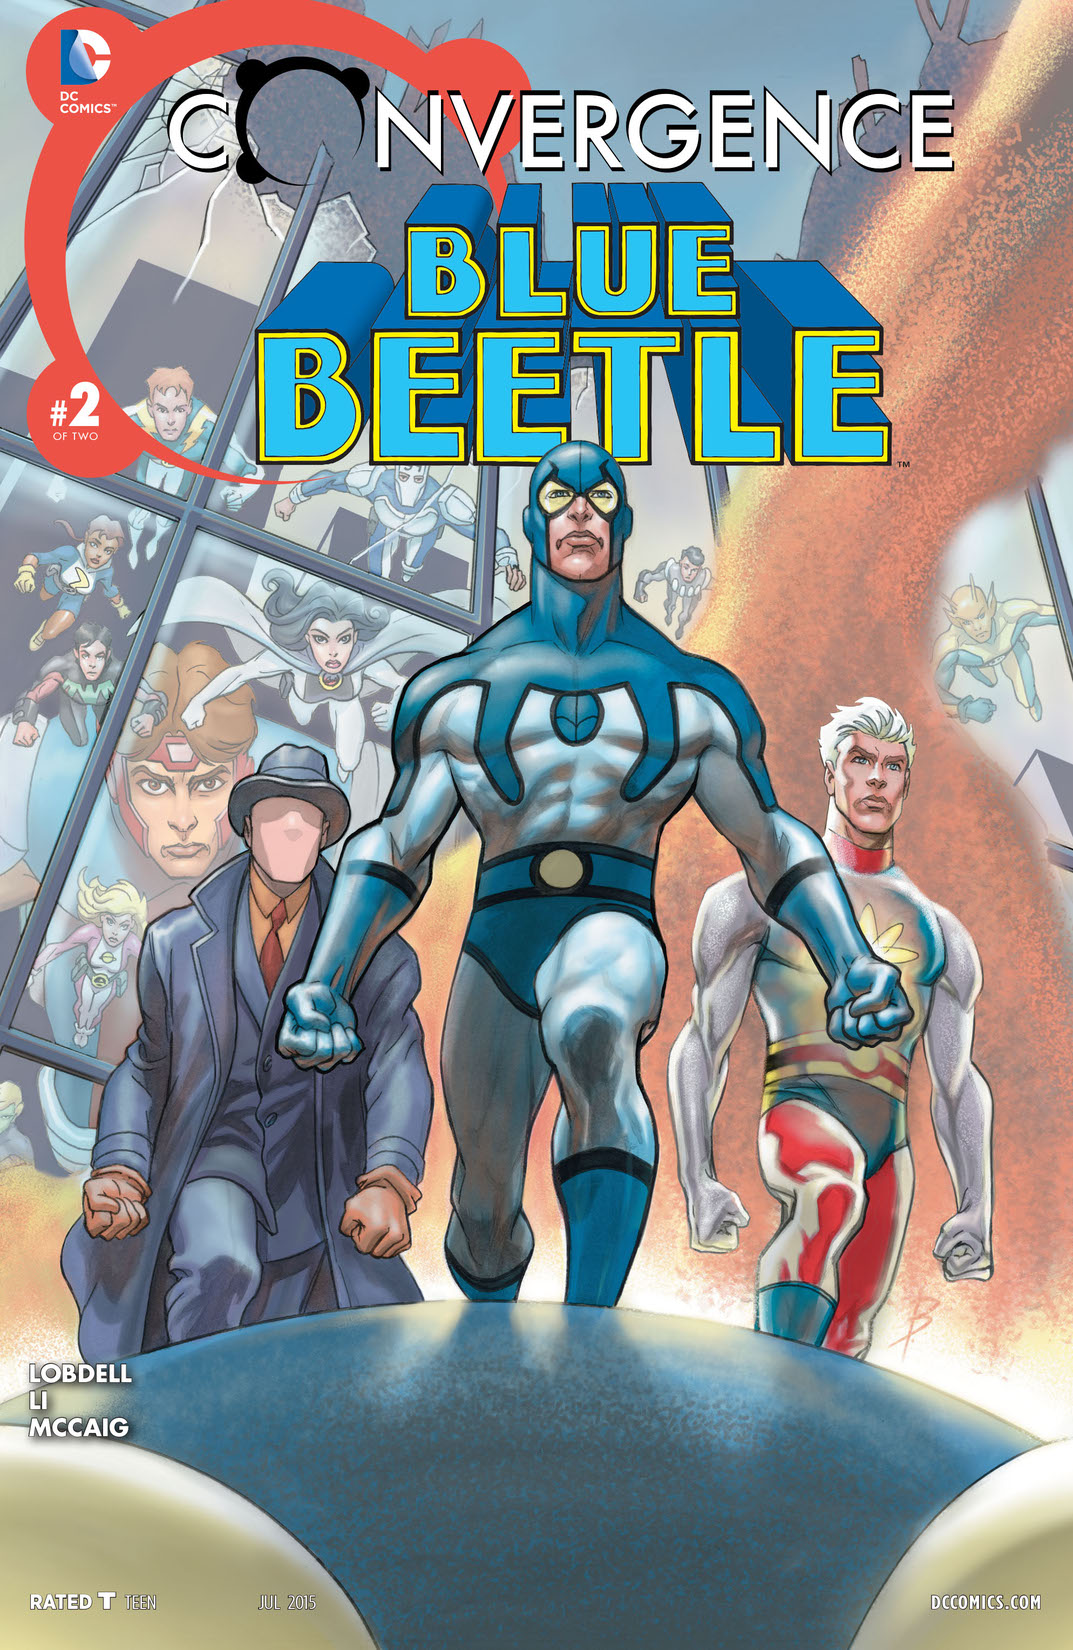 Convergence: Blue Beetle #2 preview images